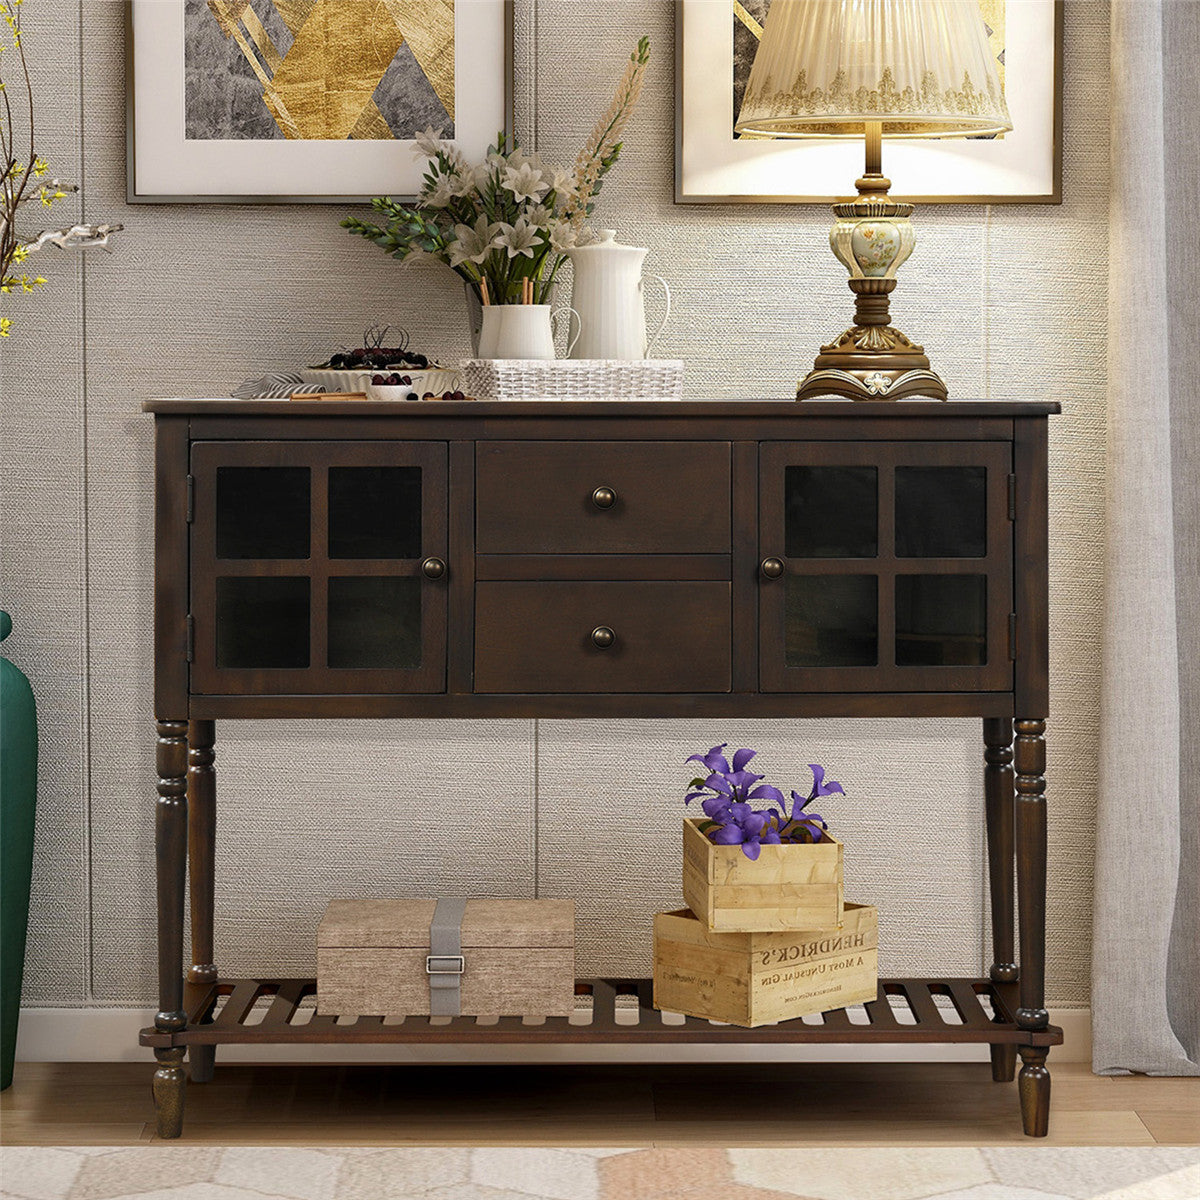 Sideboard Console Table with Bottom Shelf | Farmhouse Wood Buffet Storage Cabinet Living Room